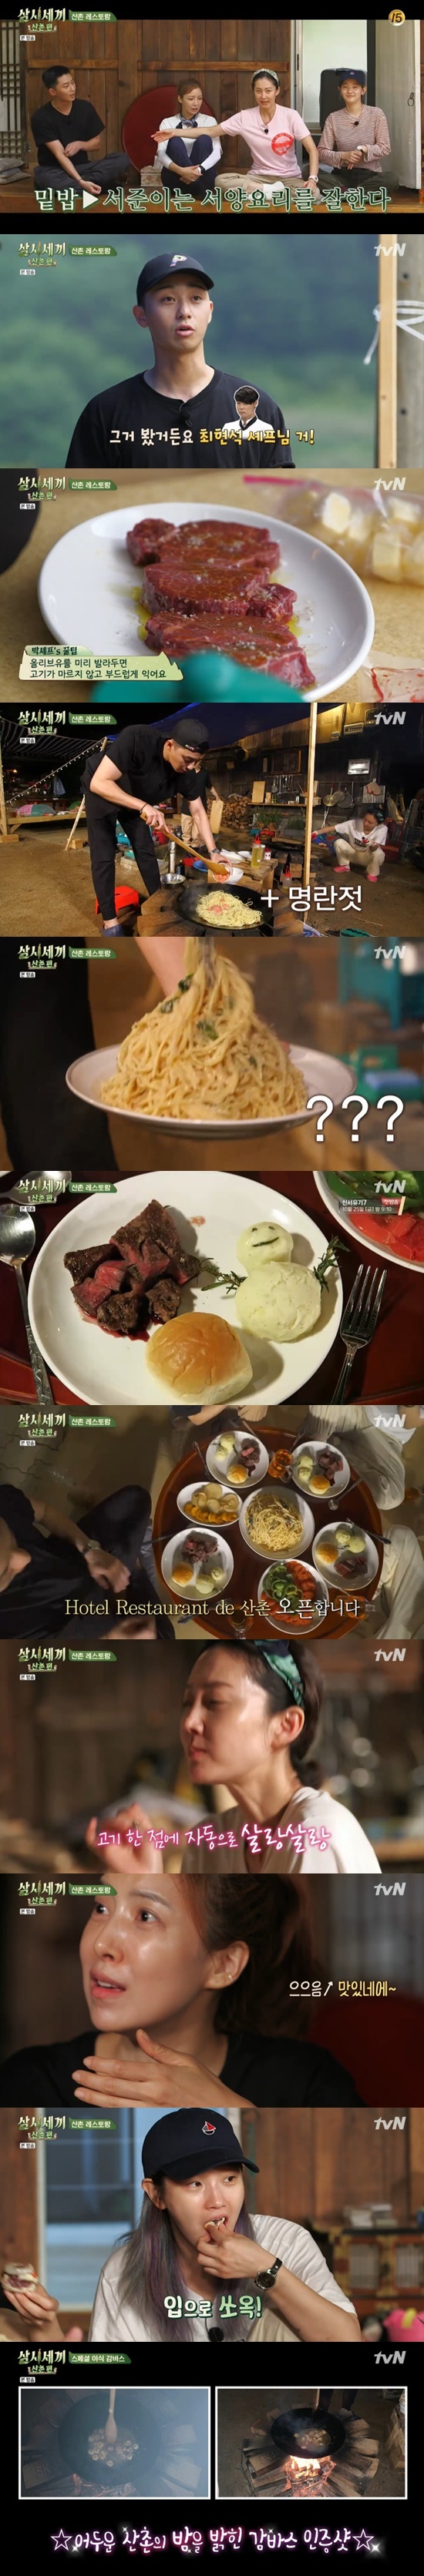 In TVN Three Meals a Day Mountain Village (director Na Young-seok, Yang Seul-gi), which was broadcast on the afternoon of the 11th, the opening of the mountain village restaurant of Actor Park Seo-joon was drawn.Park Seo-joon had been preparing Pasta and other cooking ingredients during a visit to the mountain village; after a persistent persuasion of the three-kiss family, the crew allowed it to be on an undue line.Park Seo-joon was embarrassed by the three-member family expecting a dinner dish of Park Seo-joon.Yum Jung-ah encouraged Park Seo-joon, saying, We can do it together.To help Park Seo-joon, who started cooking, the three-kiss family poured out questions: Park Seo-joon was only assisted in the Yoon Restaurant, but was embarrassed by his promotion to the chef.Park Seo-joon said, I saw Choi Hyun-seoks chef. He released a steak sauce recipe made with only wine juice.Park Seo-joon then laid the ground on steak meat and applied olive oil to prepare the meat.Potato boiling for vegetable grilled, mash potato to accompany Park Seo-joon lead has begun.Park Seo-joon made a blue Pasta with boiled Pasta cotton, and Yum Jung-ah baked a steak prepared by Park Seo-joon.The members also helped cook together.Park Seo-joon built Pasta up in a vast amount of Pasta; Park Seo-joon laughed, saying, Is not it a kitchen boy?The steak, which was baked according to the members taste, was also completed.The menus that I had never tasted in the mountain village were followed by the members praise, especially steak sauce made with wine juice.I laughed at all the visuals of Park Seo-joons so-called Gobong Pasta: Yum Jung-ah was delicious and especially the taste that Yoon Se-ah would like.Yoon Se-ah tasted Pasta and was surprised to say, The name is broken and it looks like cheese powder.In addition, Yoon Se-ah in the Mash Potato made in the shape of a snowman was worried that I am sorry to eat this and laughed at it.Park Seo-joon laughed at Yum Jung-ah, who was delighted, saying, I did not know you were so excited.The members then fell into roasted tomatoes and started to taste tomatoes, followed by Park Seo-joon, who recommended making hamburgers and eating them.When I saw the market, the members made hamburgers with the morning bread they bought.Yoon Se-ah praised Park Seo-joons cooking, saying, I have to eat with Sodam and Kimchi, but I eat without it.Even after a wonderful dinner, Park Seo-joon showed a special nighttime Gambas for the members, and after the true worker, the main chef showed charm.On the other hand, tvN Three Meals a Day Mountain Village is broadcast every Friday at 9:10 pm.